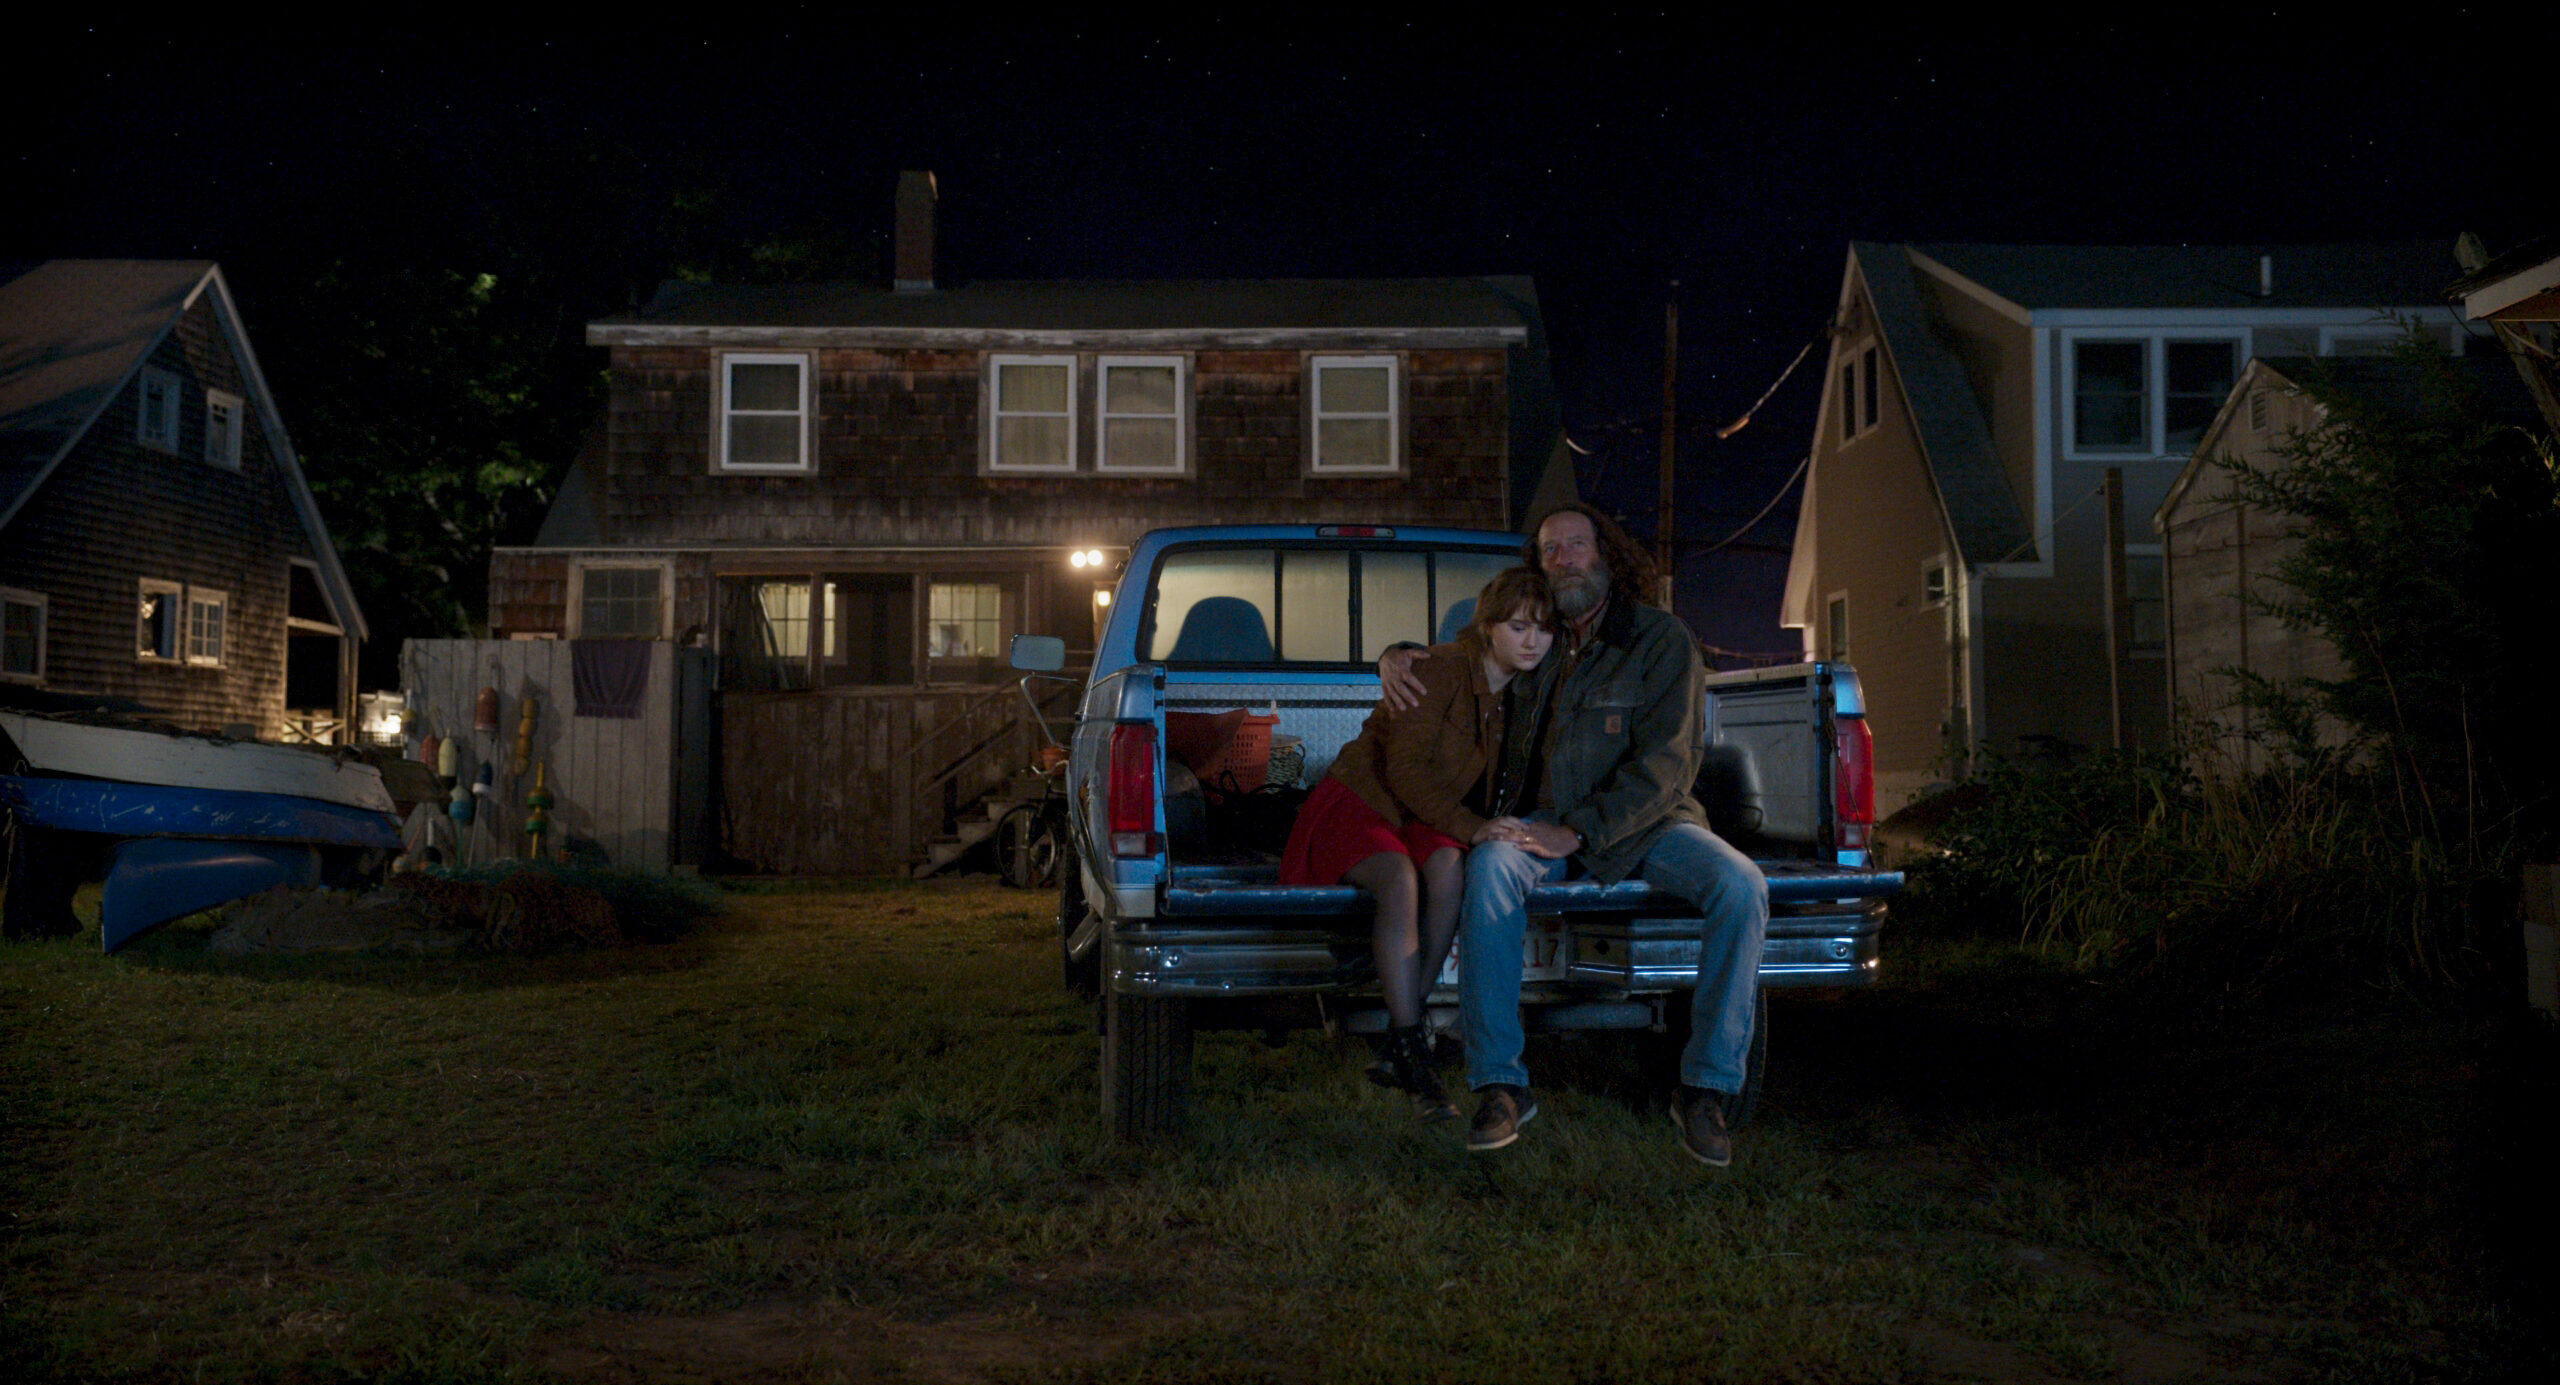 A young woman and older man sit on the tailgate of a pickup truck parked behind a house